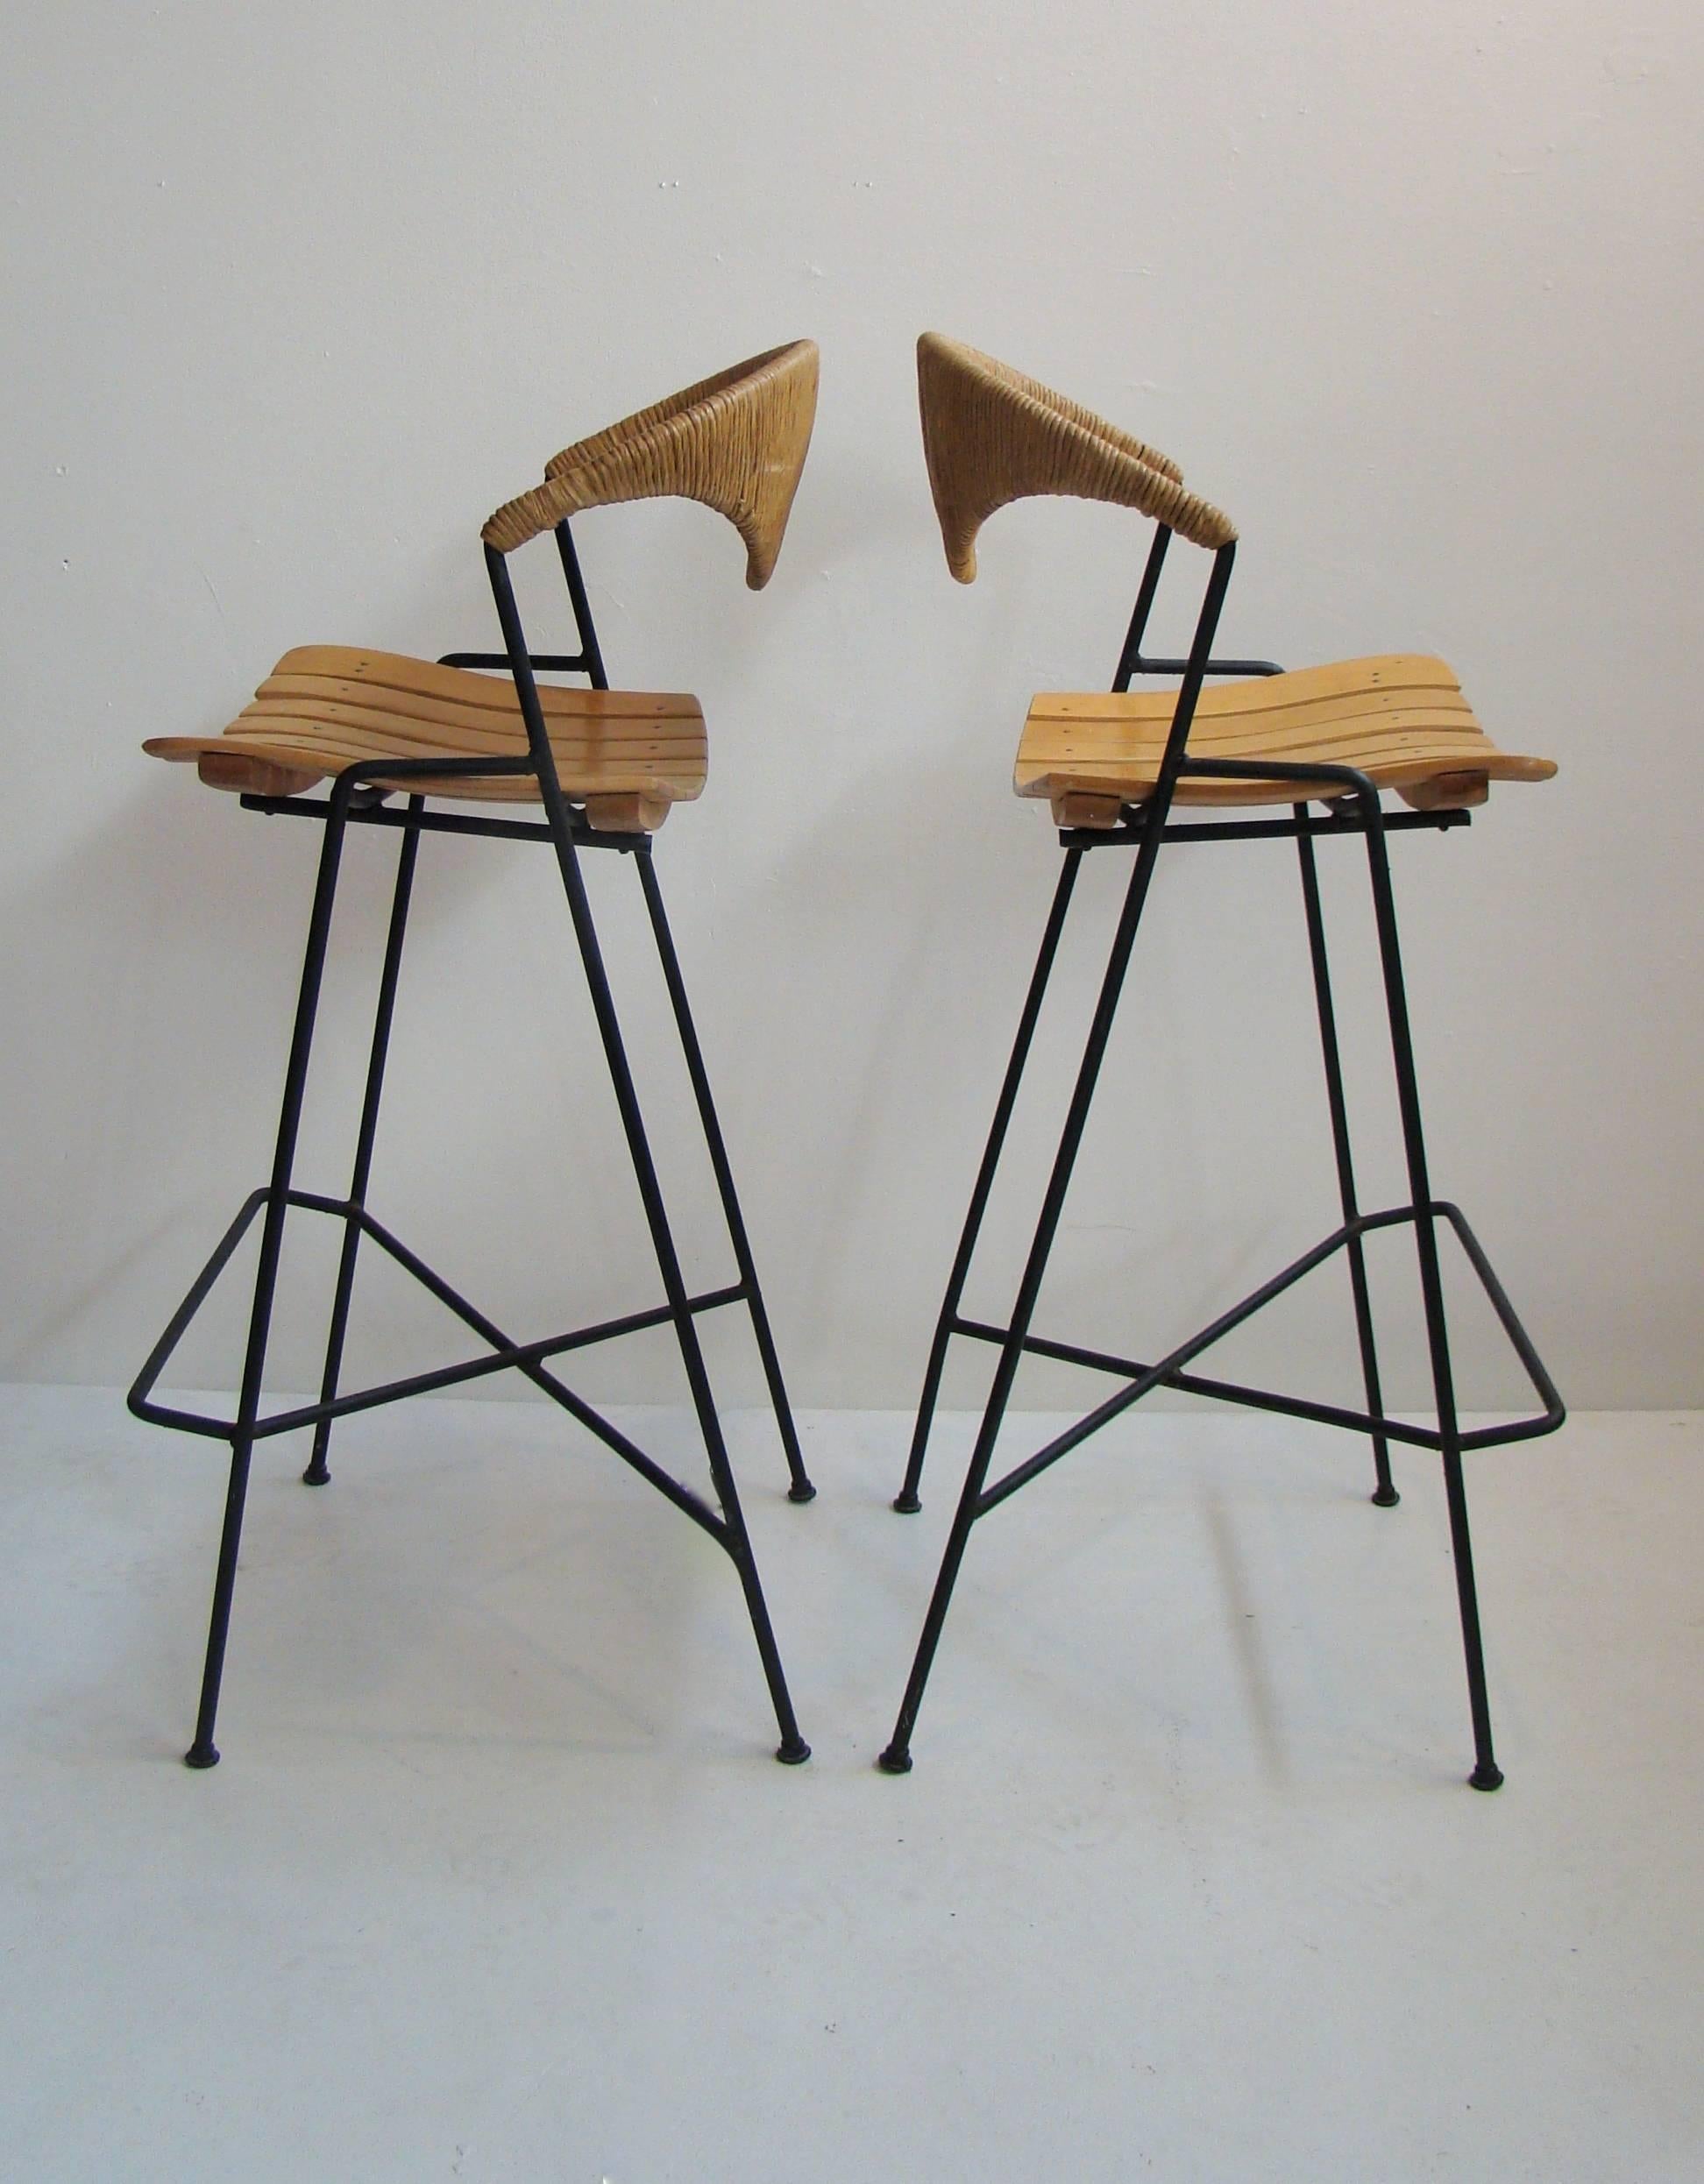 Beautiful set of 3 ....wrought iron and wood bar stools with matching bar designed by Arthur Umanoff for Raymor.  c.  1960s. All Pieces are  in very good original condition.  All glides present and no chips cracks or breaks.                    Bar